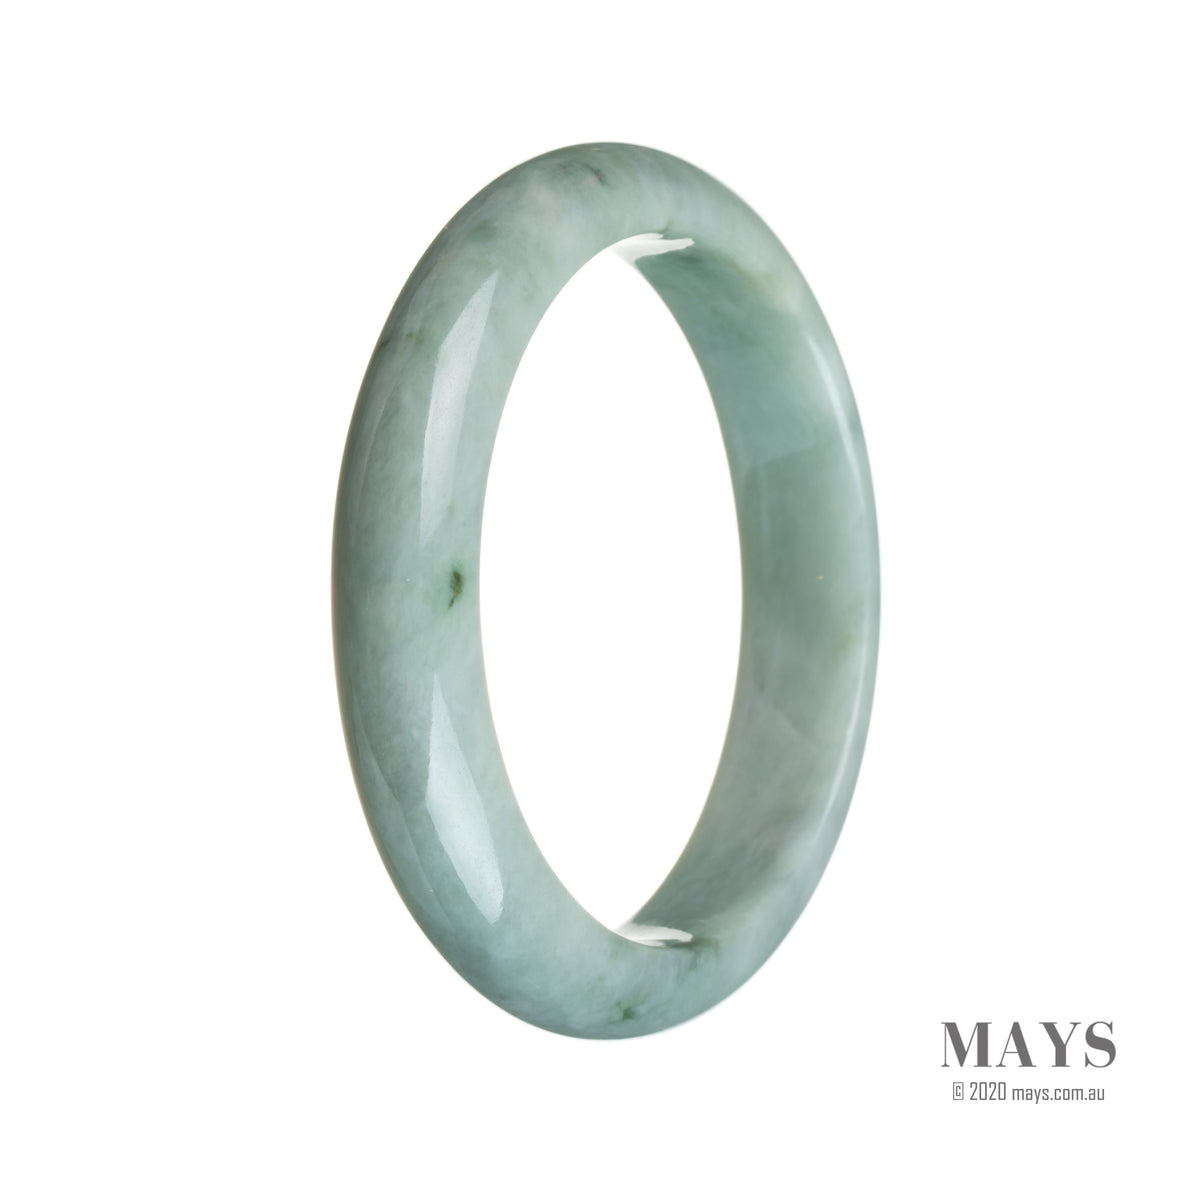 An elegant pale green jade bracelet with a semi-round shape, measuring 59mm in size. Crafted with authentic Grade A jade, this bracelet is a stunning addition to any jewelry collection. From MAYS GEMS.